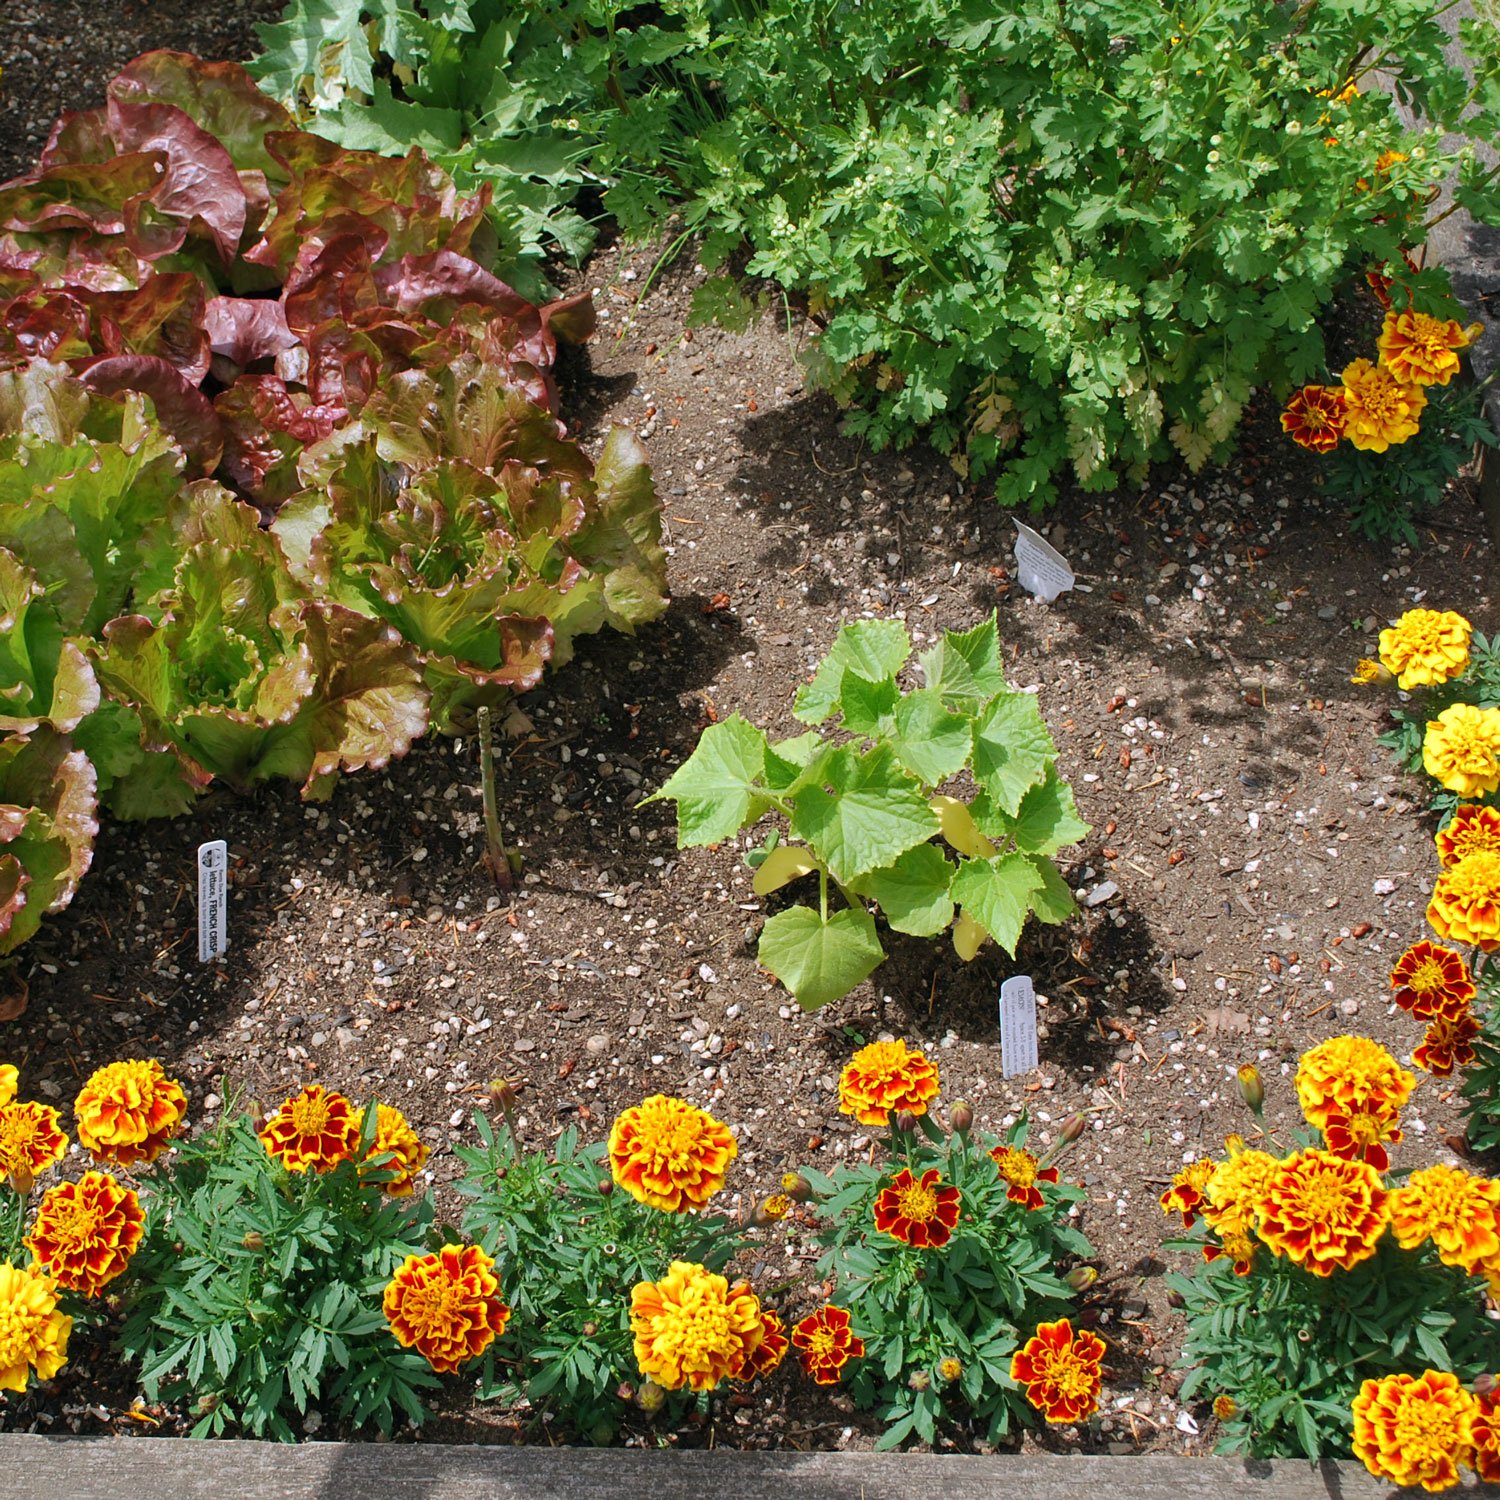 Image of Container garden with carrots, marigolds, and lettuce